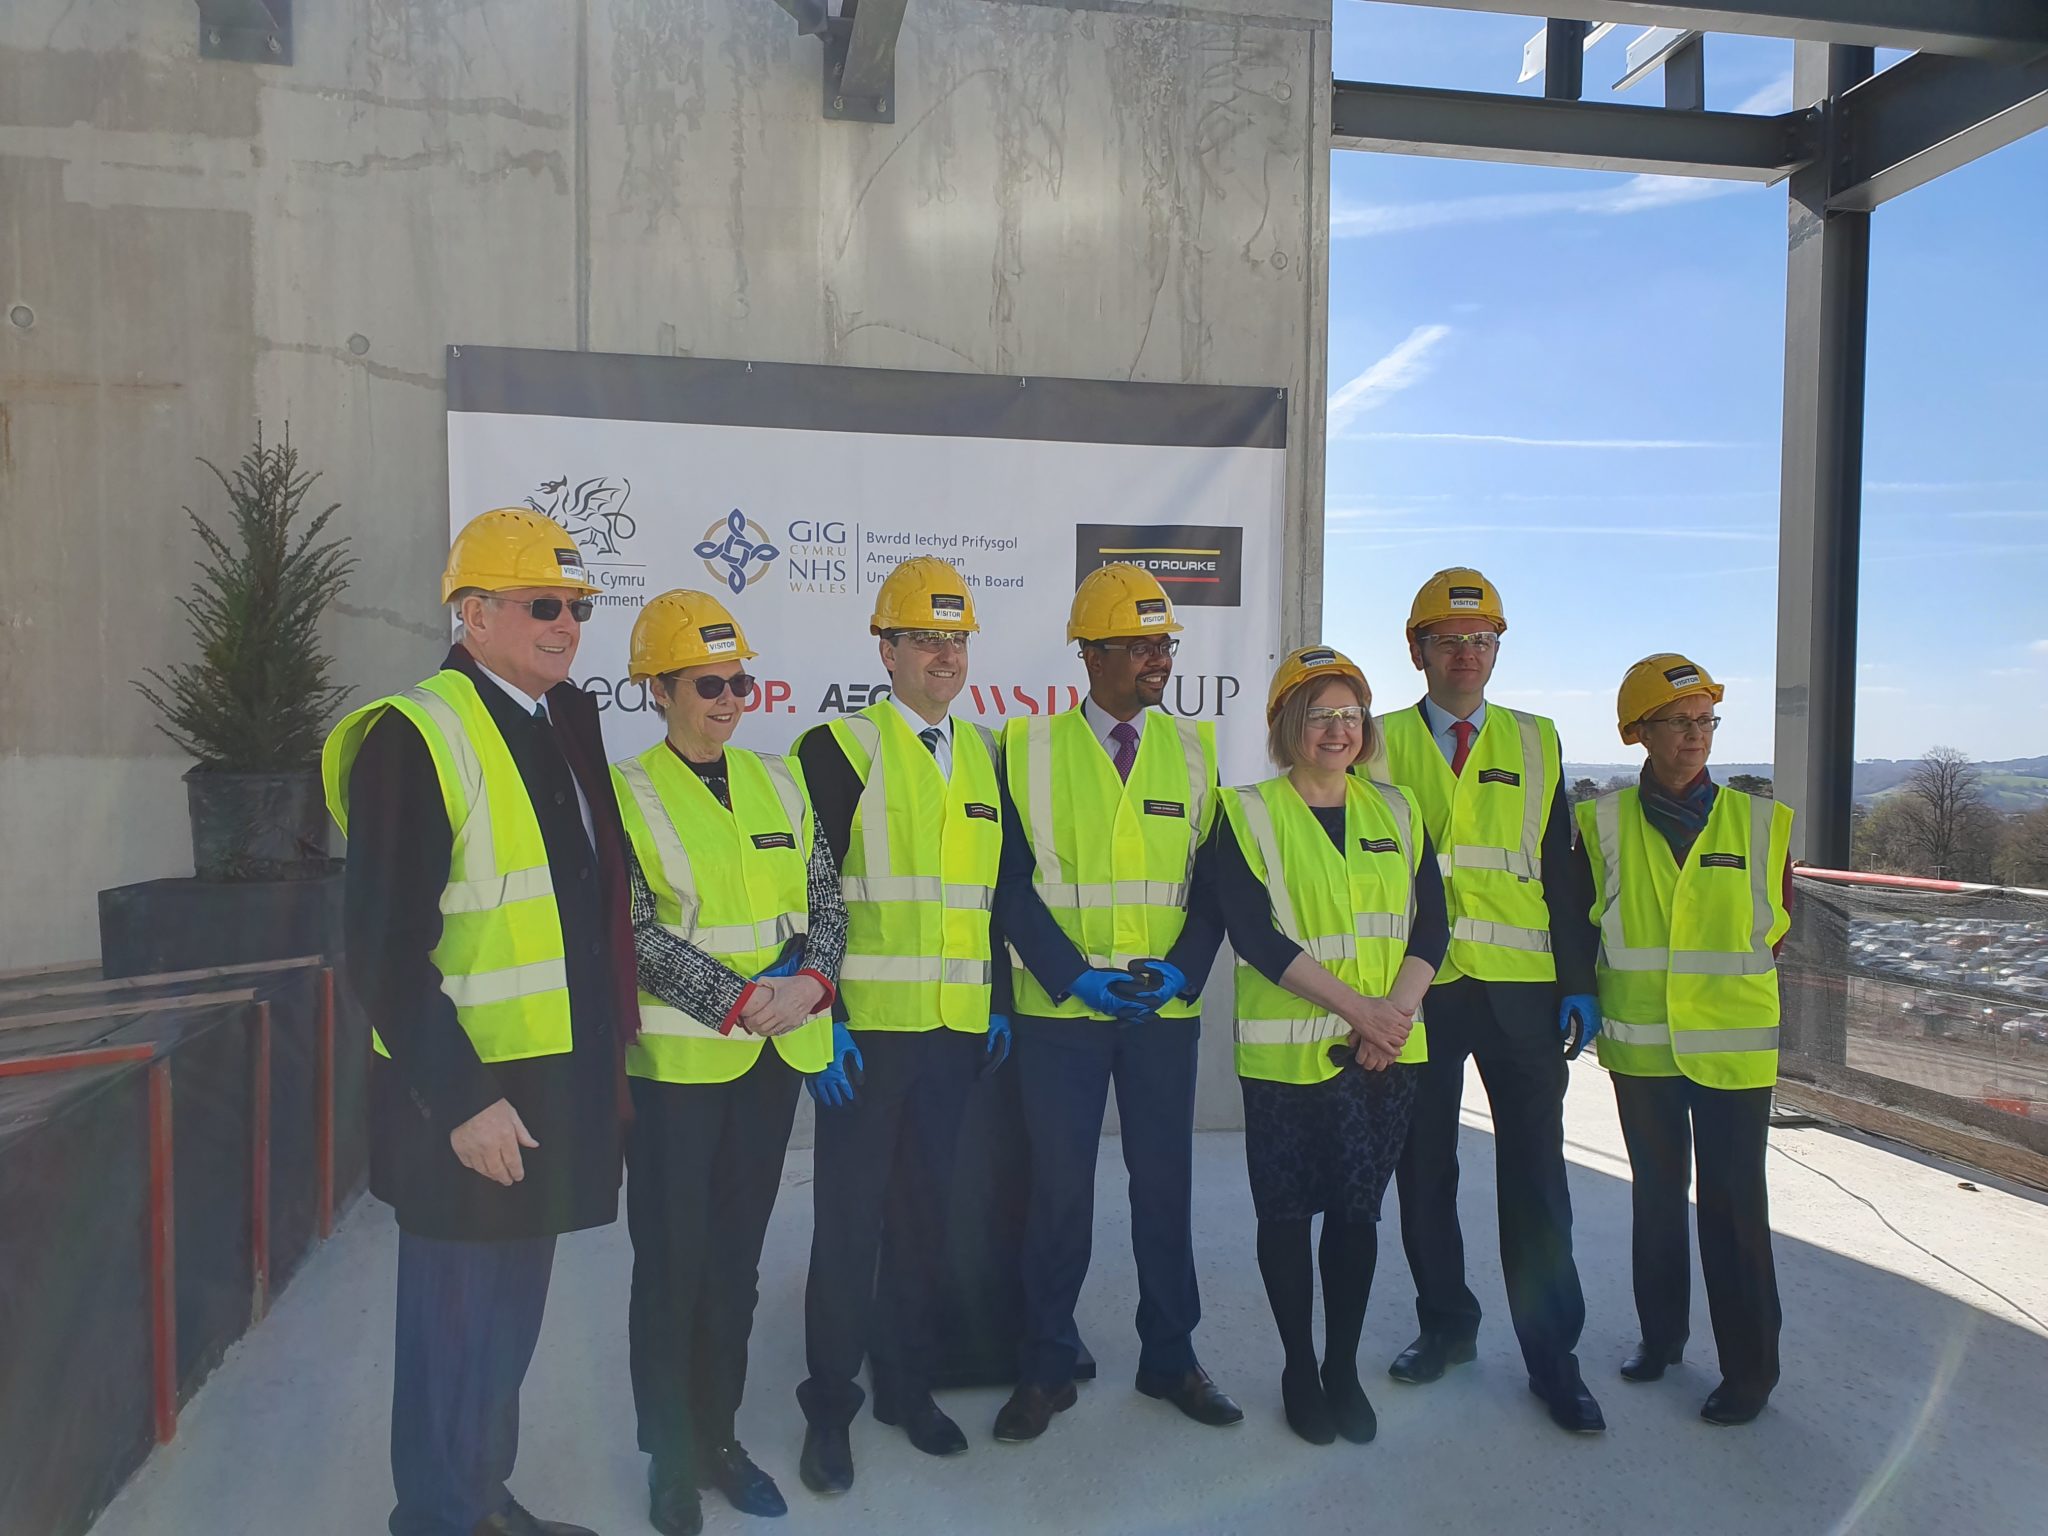 Vaughan Gething AM, Minister for Health and Social Services, and guests at the topping out ceremony